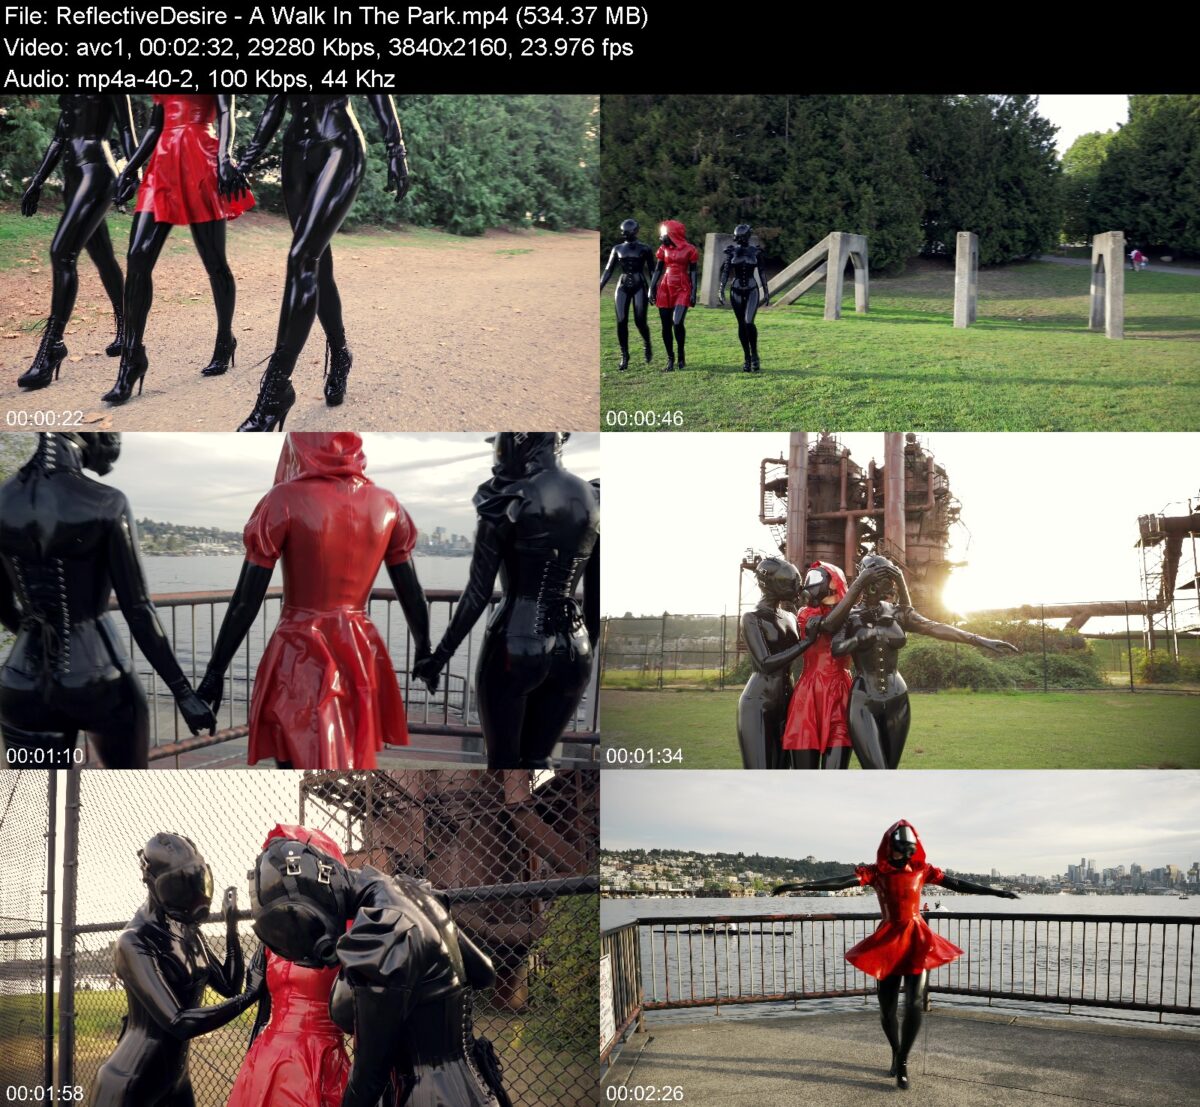 Actress: ReflectiveDesire. Title and Studio: A Walk In The Park